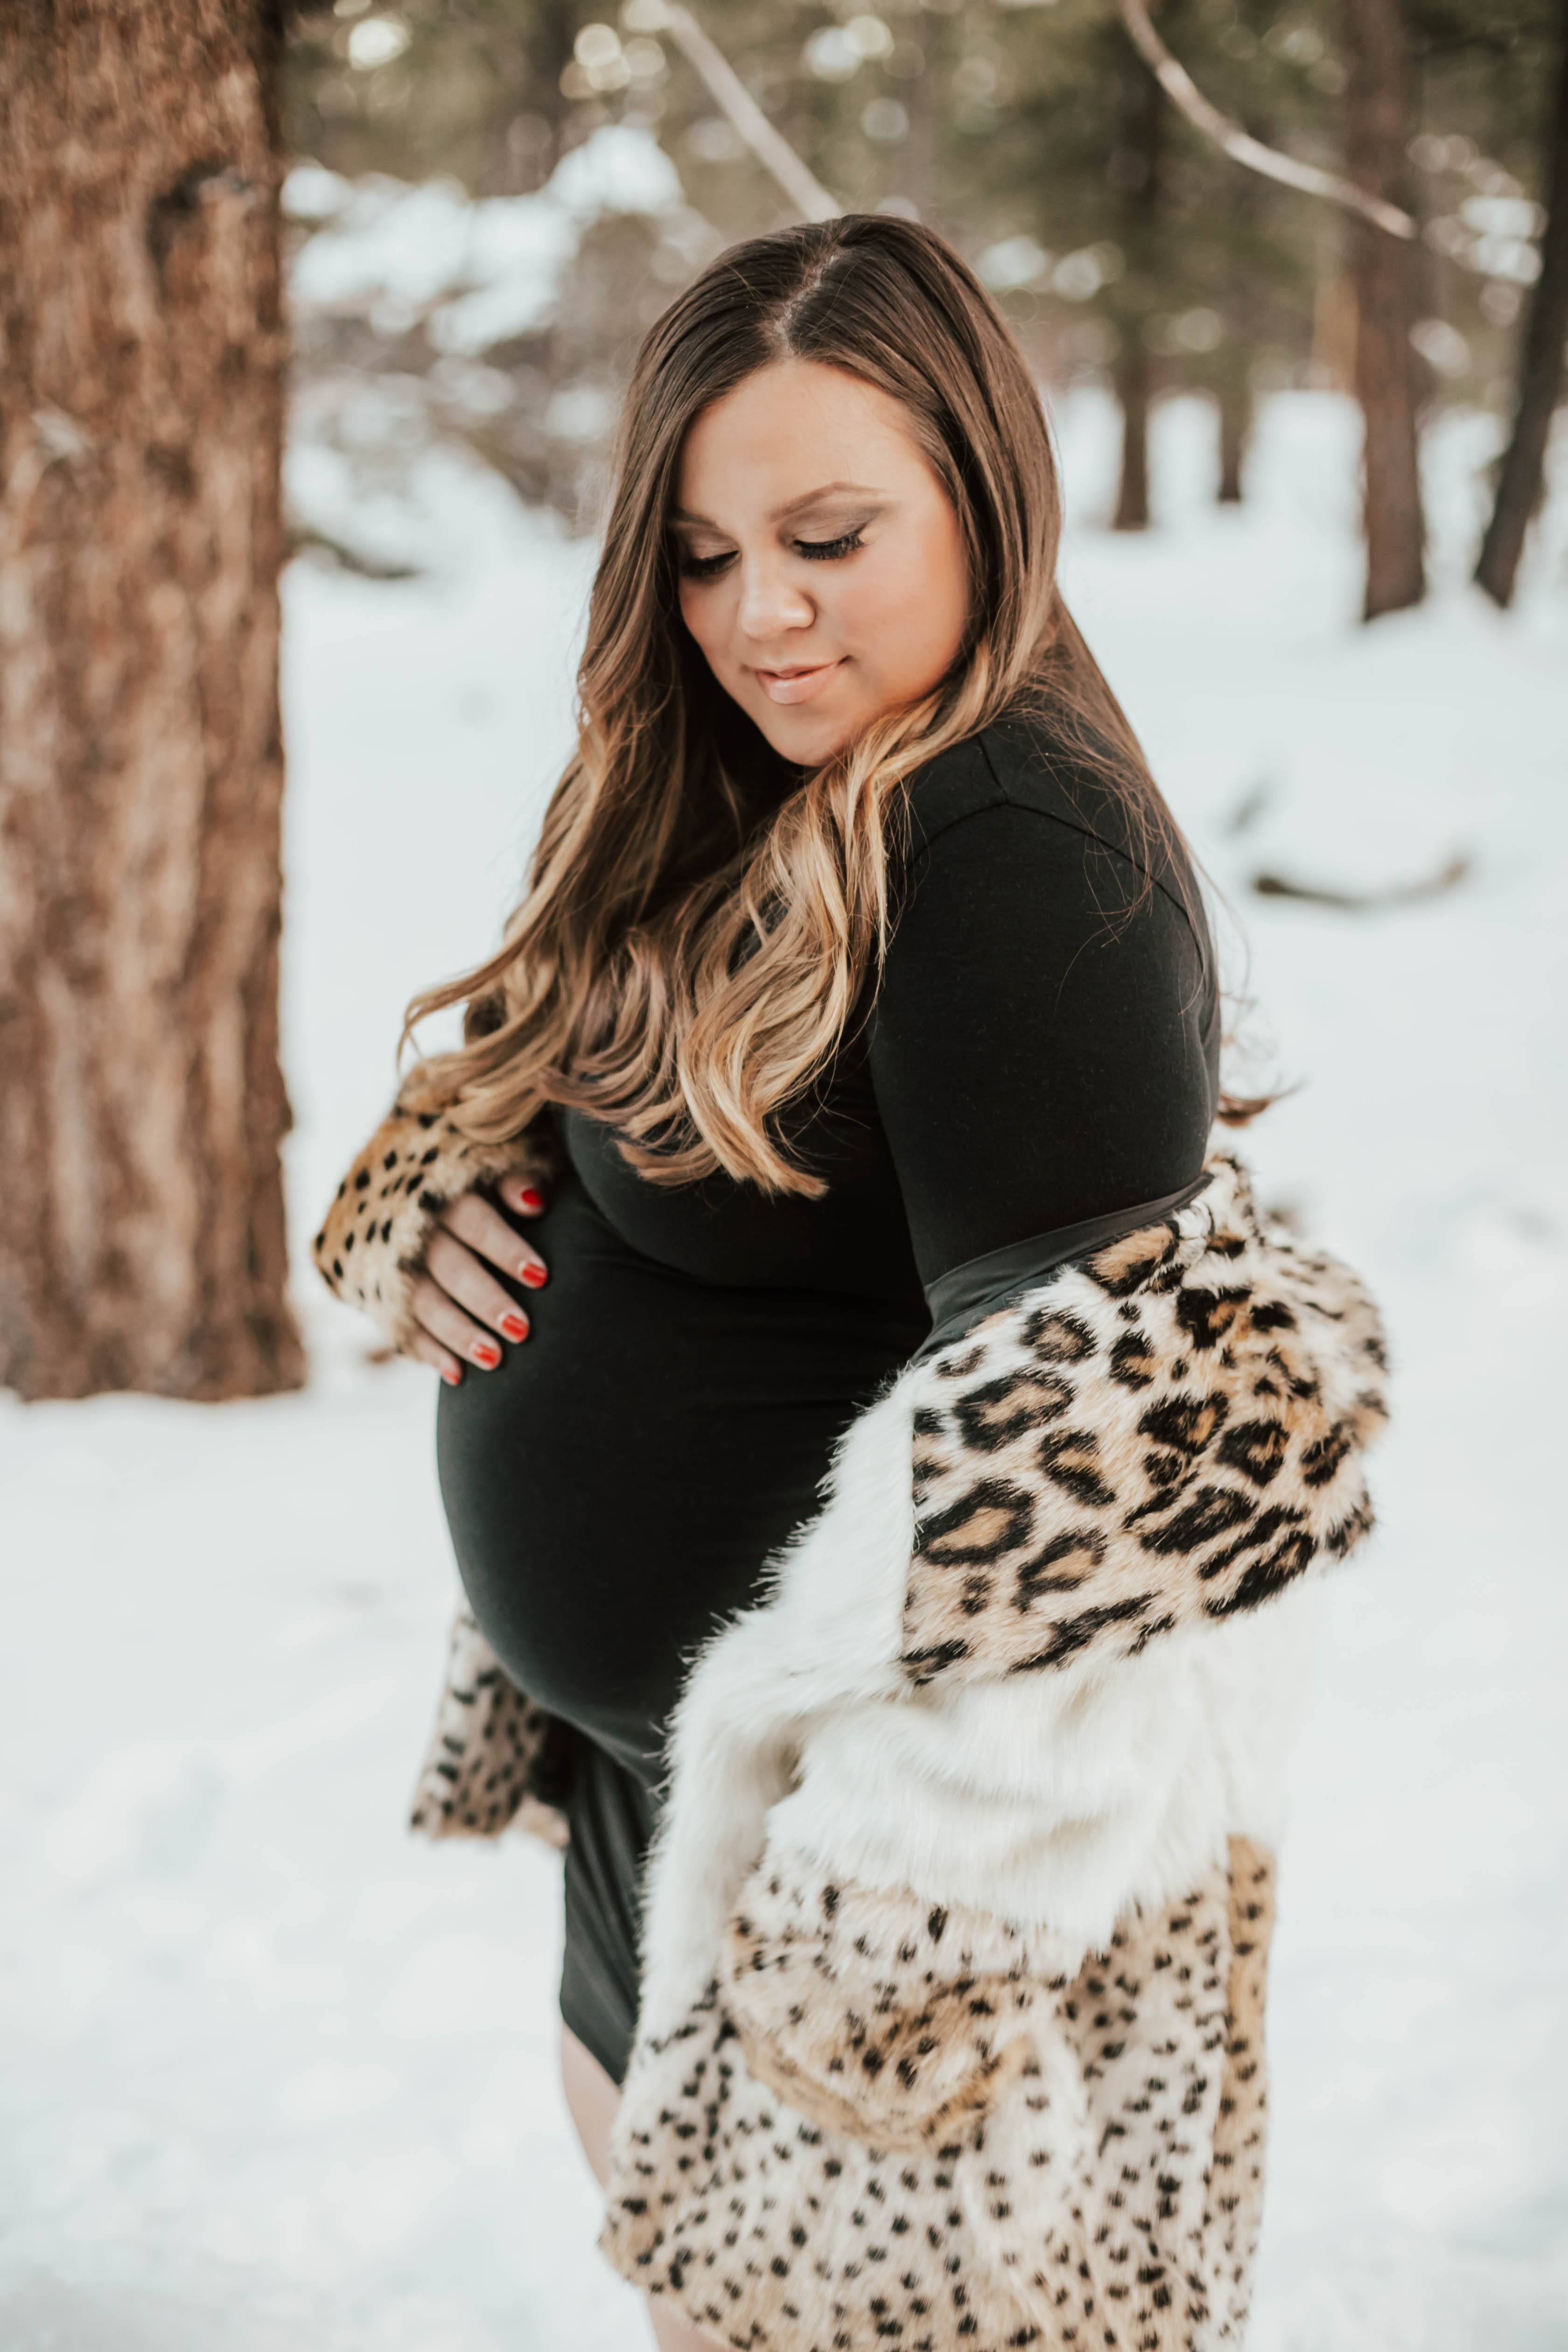 Reno blogger, Ashley Zeal from Two Peas in a Prada shares her third-trimester update. Read about her symptoms and cravings as her due date quickly approaches! 